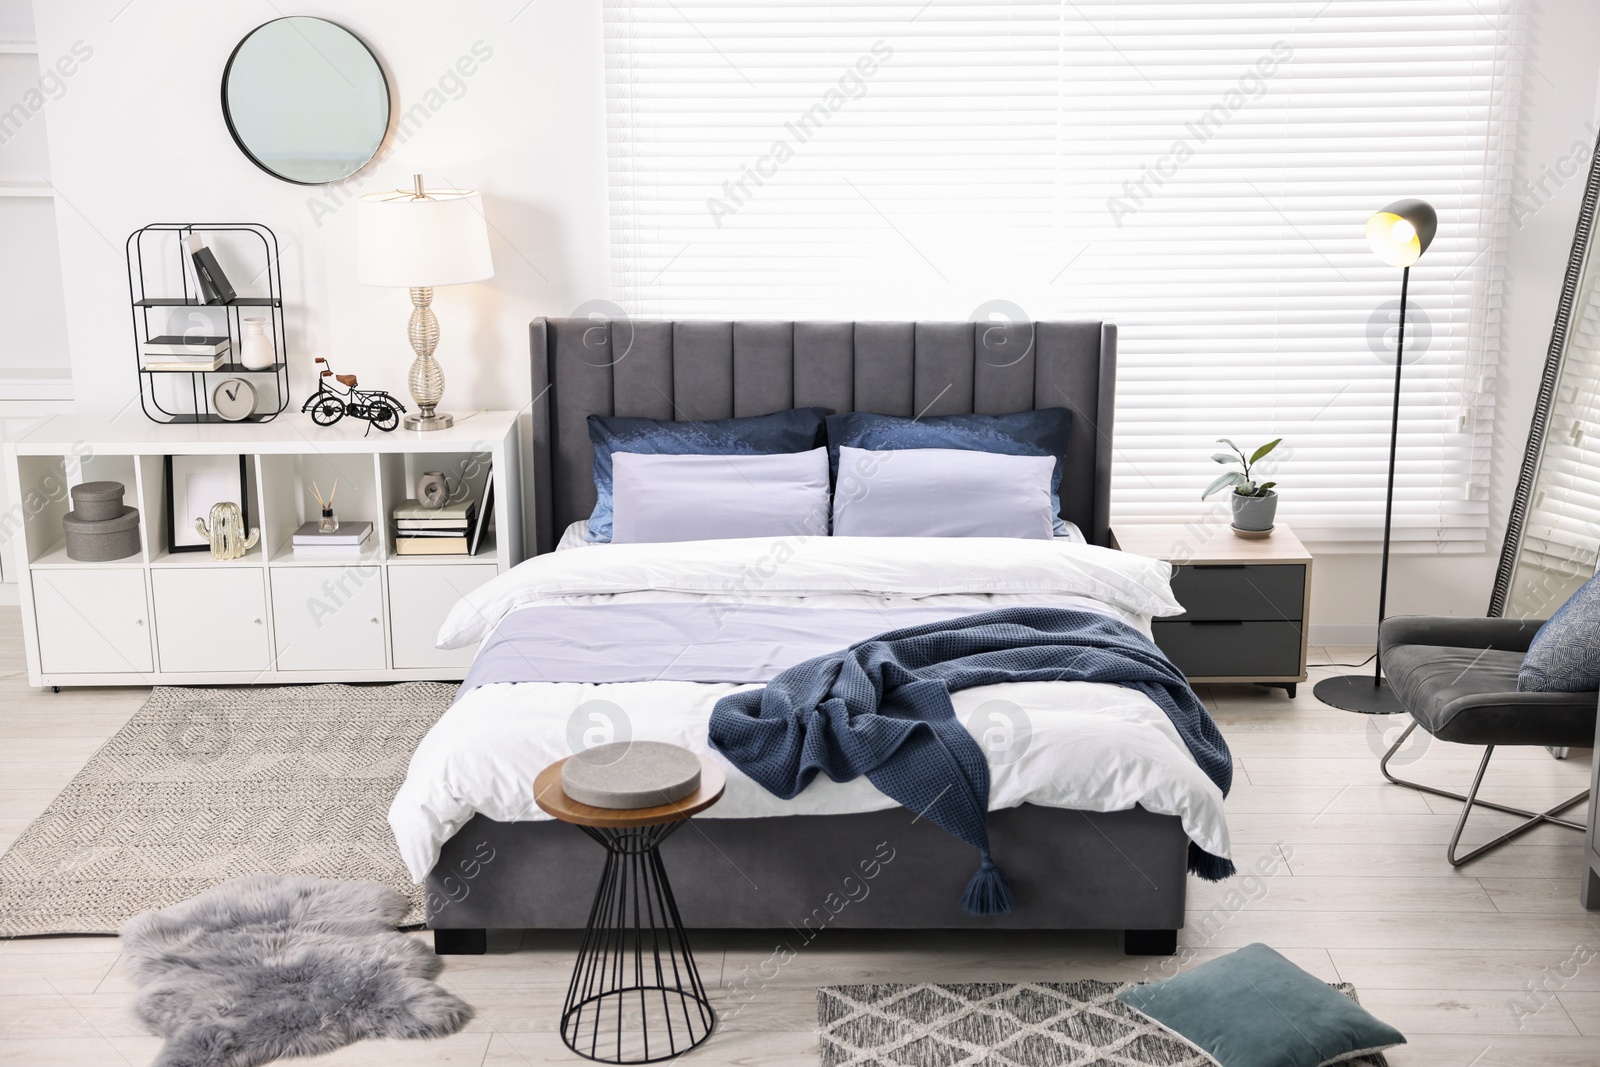 Photo of Bright plaid on bed in stylish bedroom. Interior design